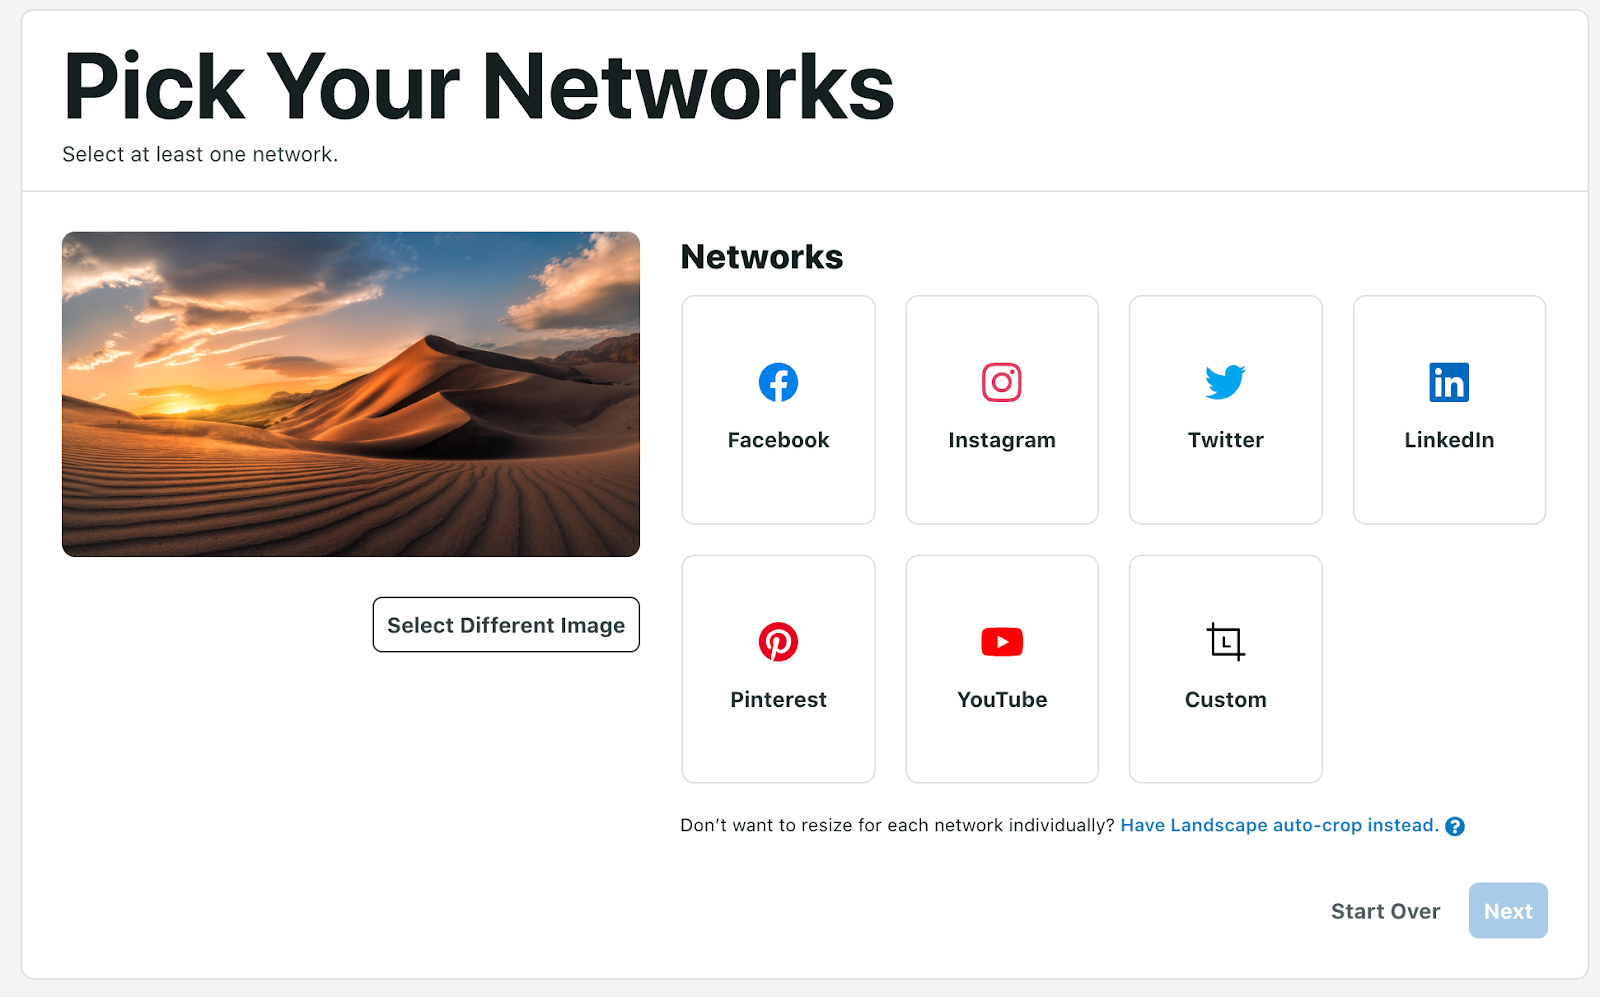 A screenshot of the free SproutSocial cropping tool with a photo of a desert and icons of various social networks